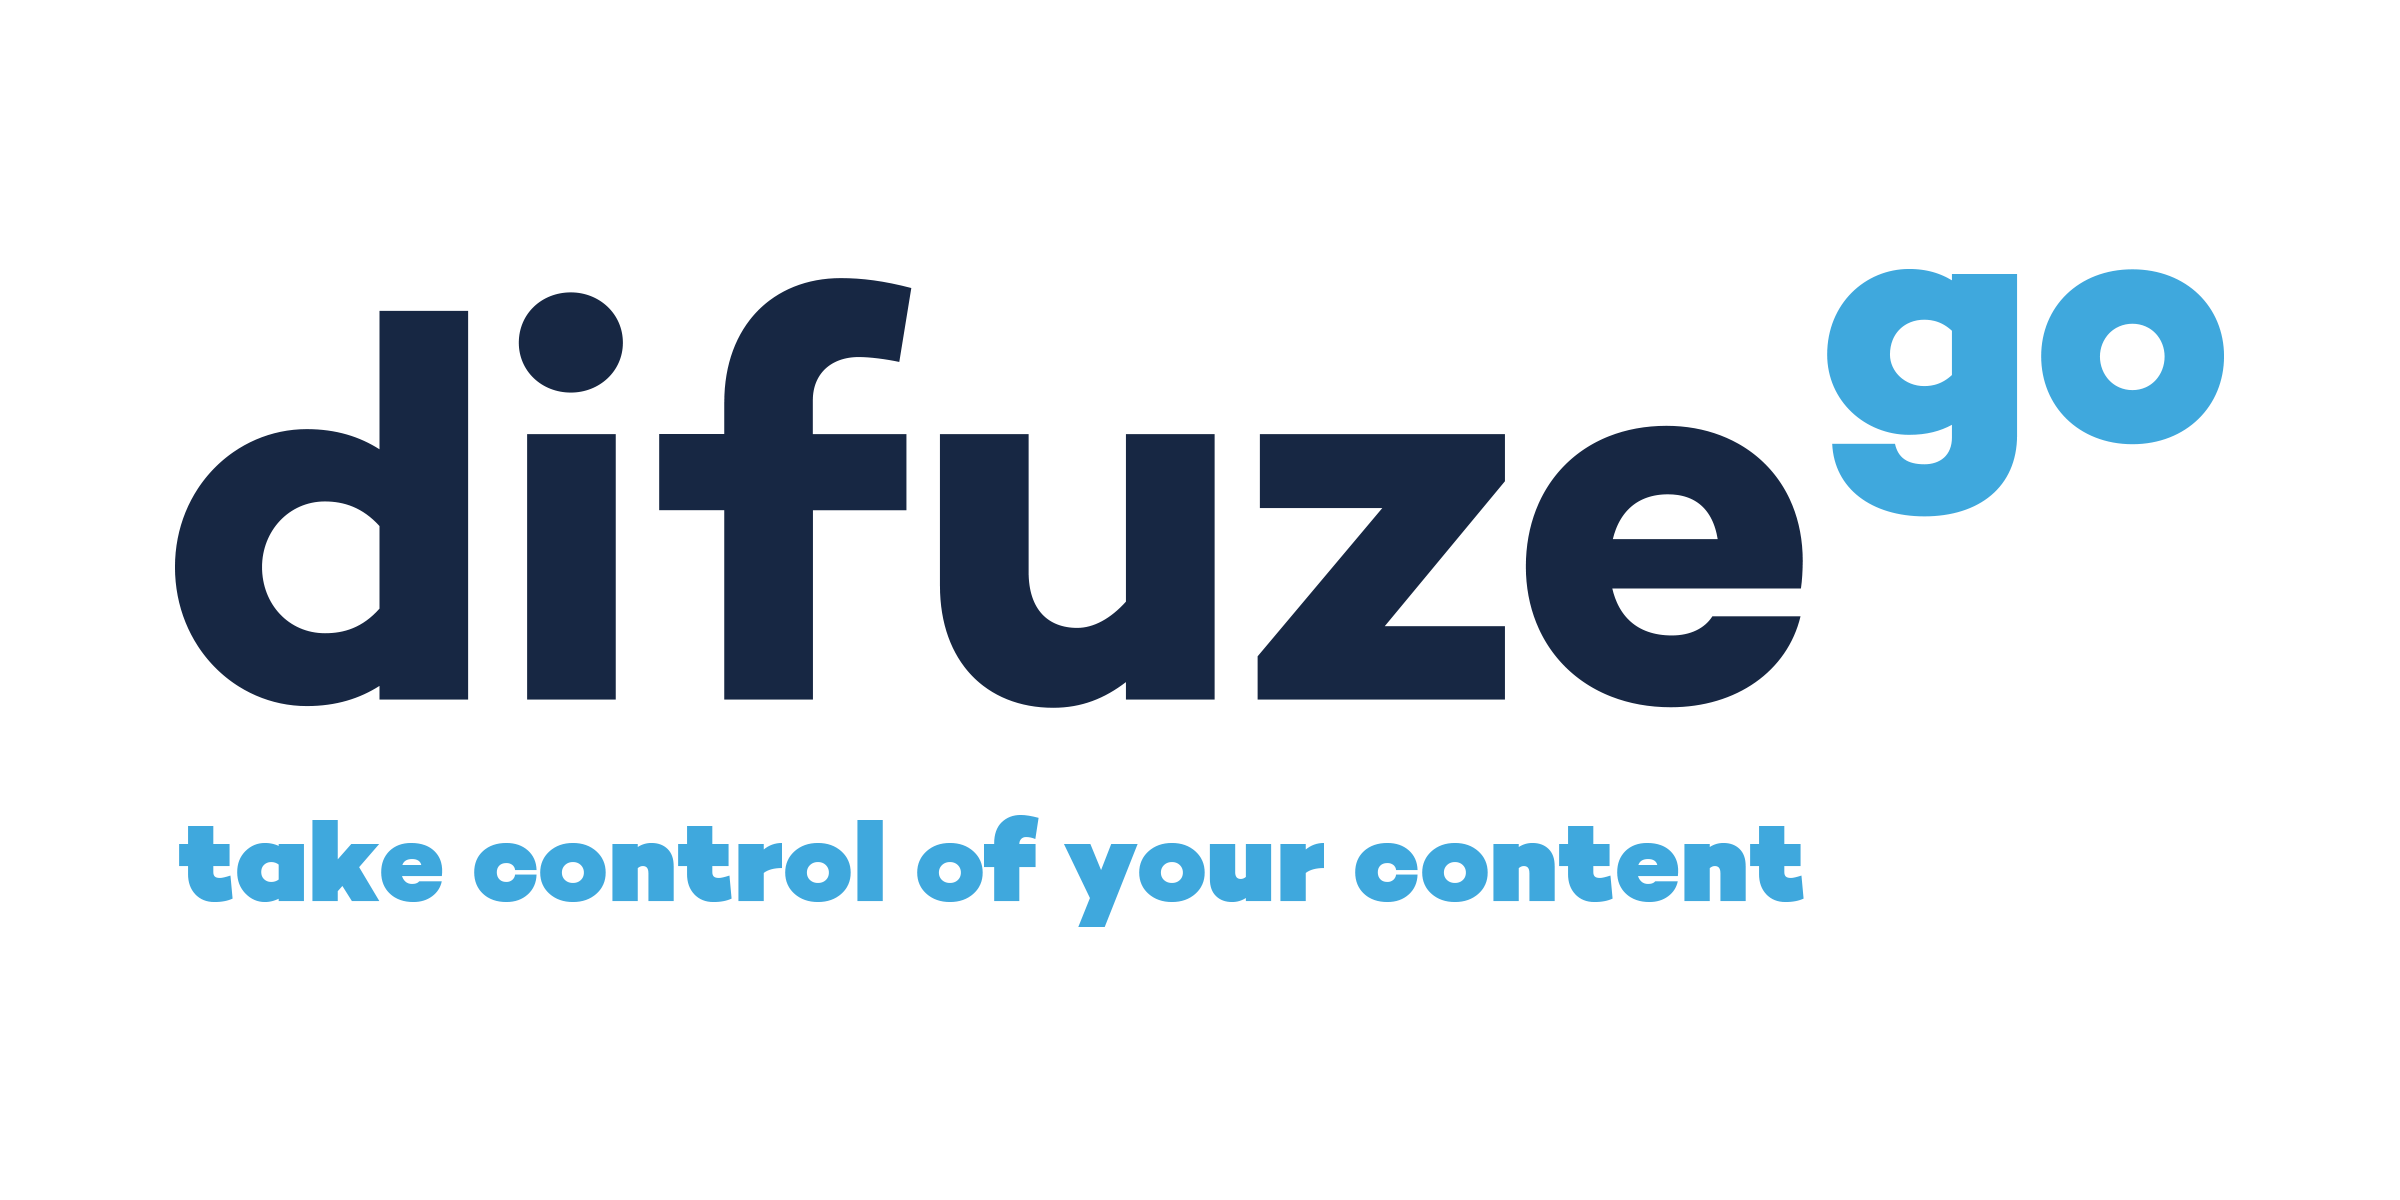 difuze adds new functionalities to its cloud-based content management platform difuzego